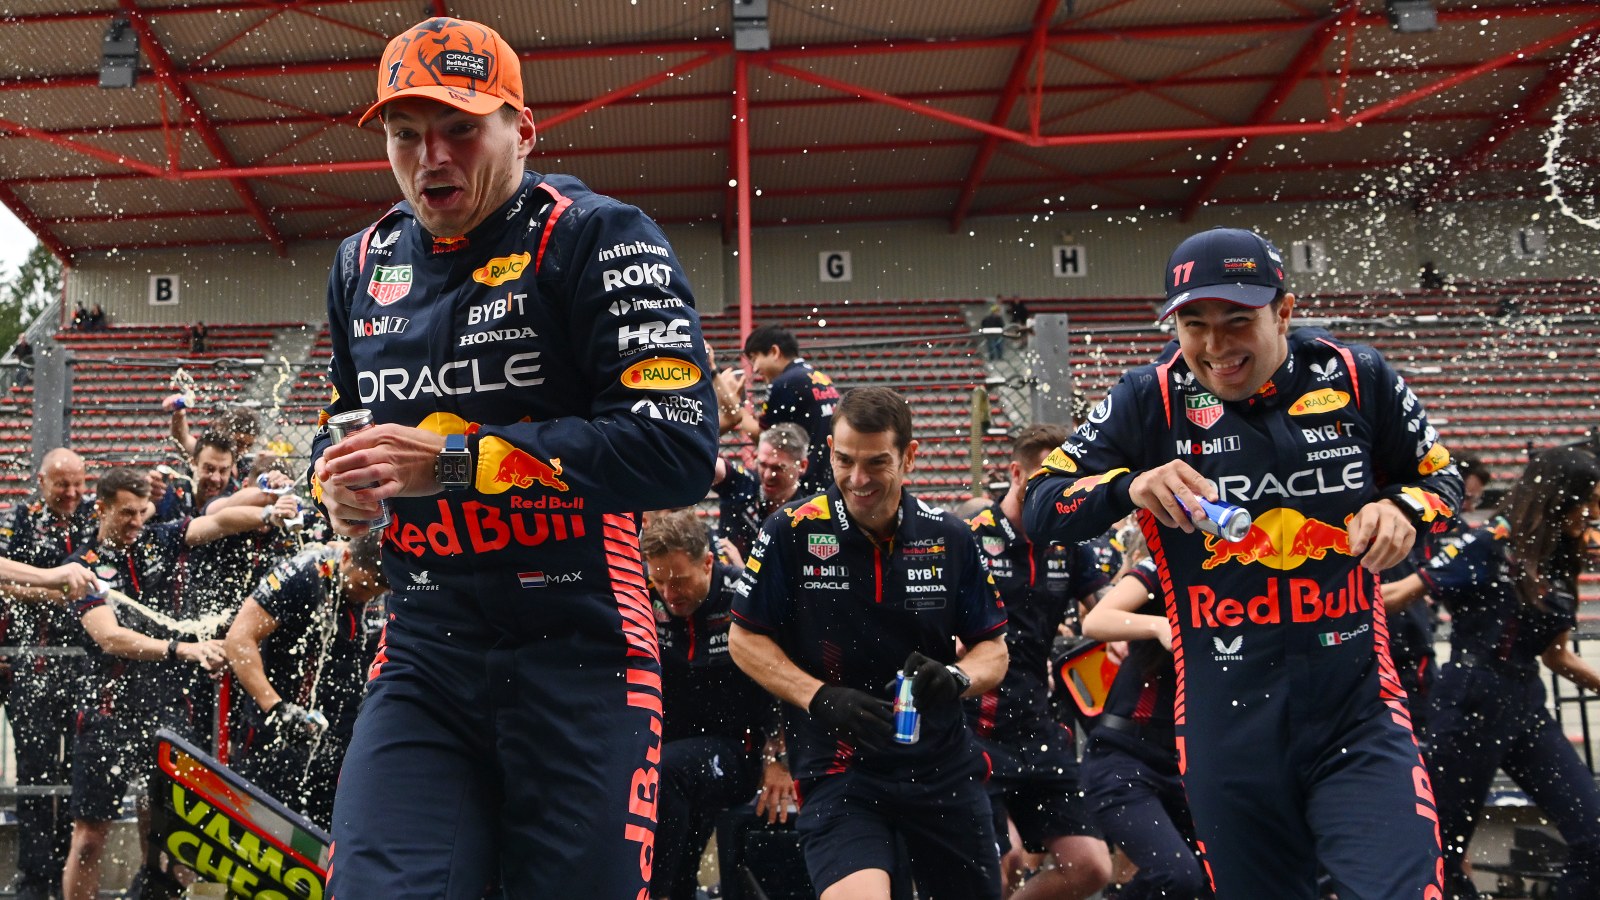 Max Verstappen and Sergio Perez run for cover from Red Bull spray.